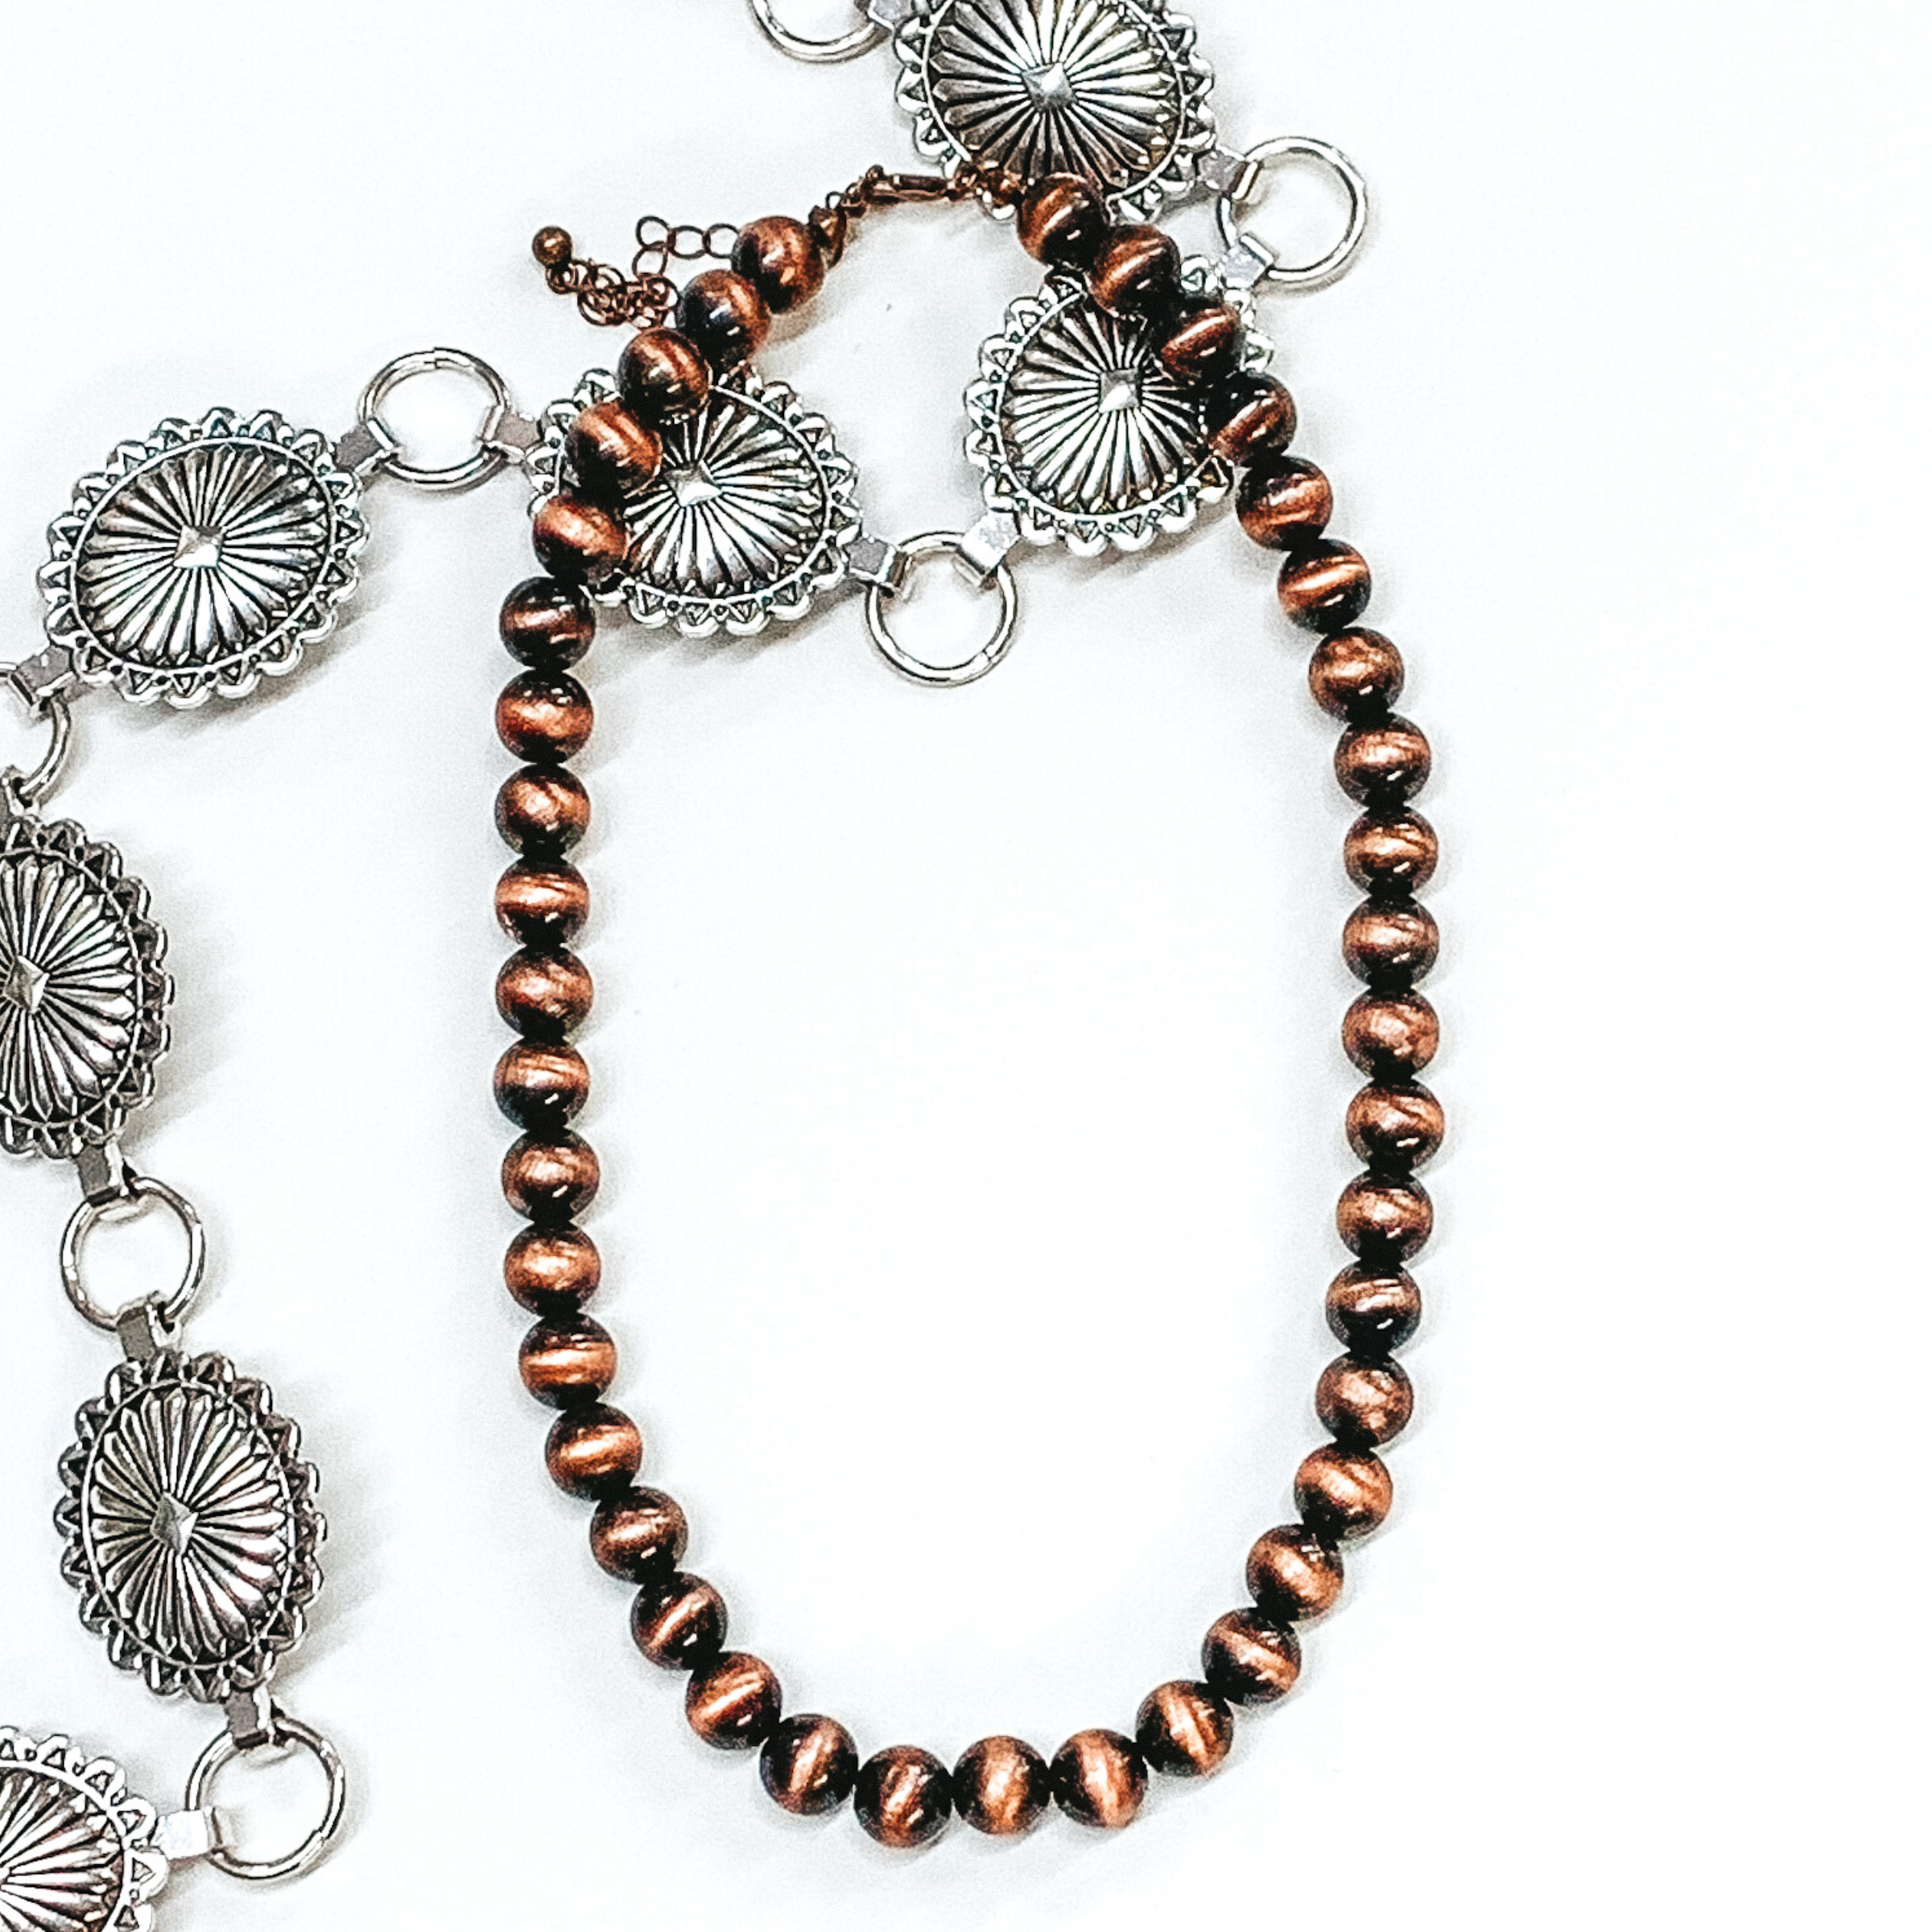 Copper beaded necklace pictured on a white background with silver conchos as decoration.